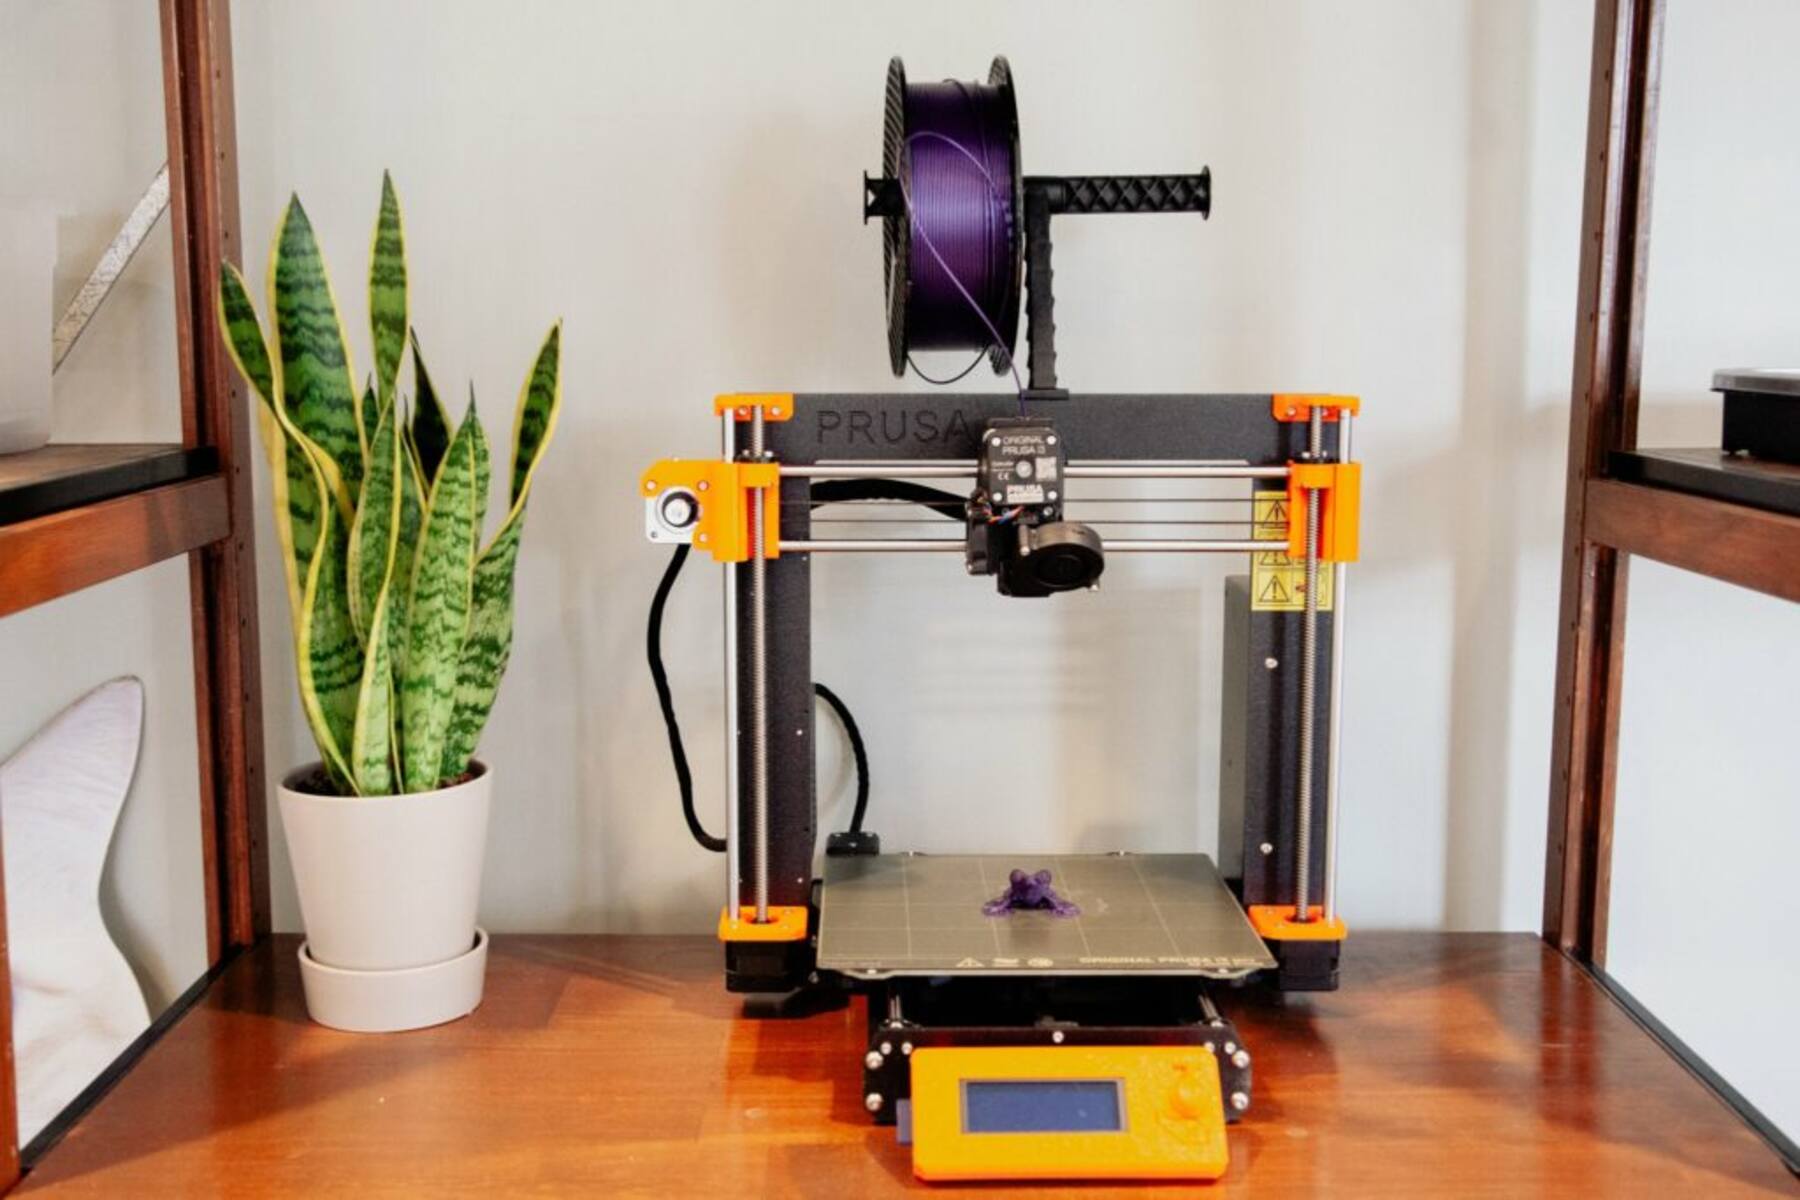 How Do You Use A 3D Printer At Home